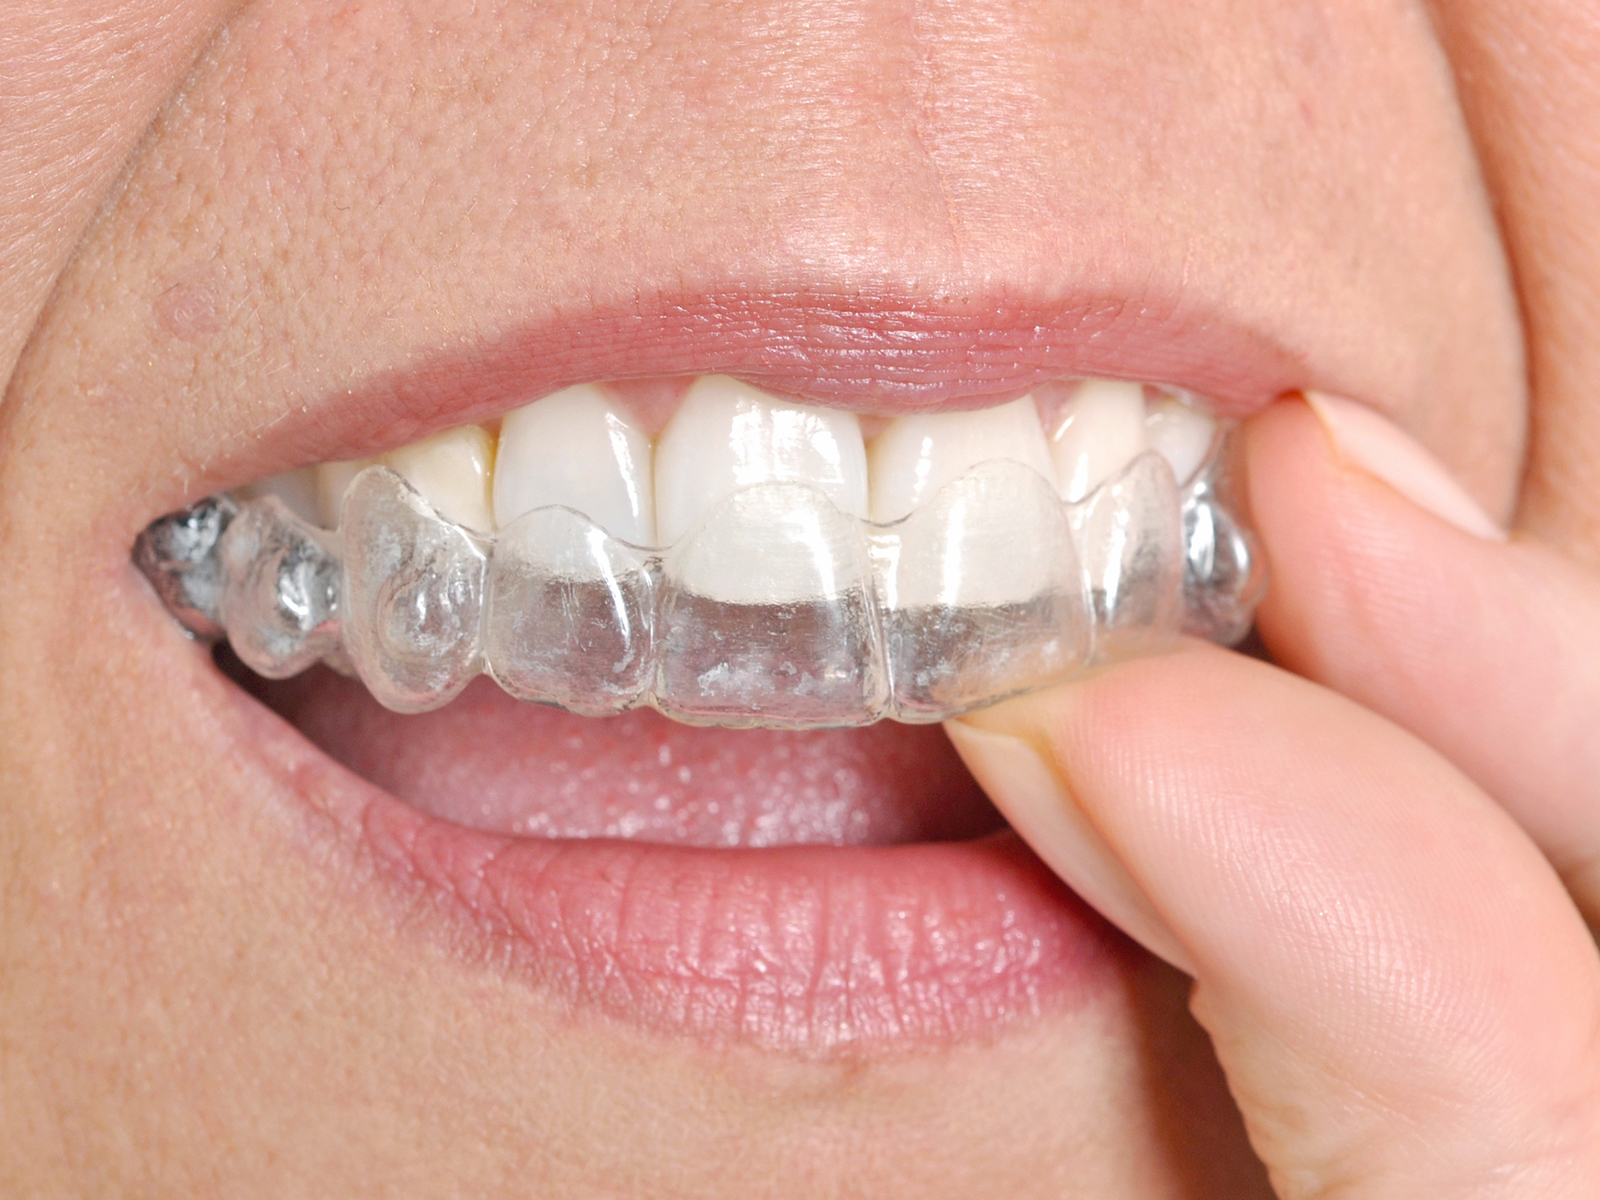 Should I sleep with my Invisalign in?